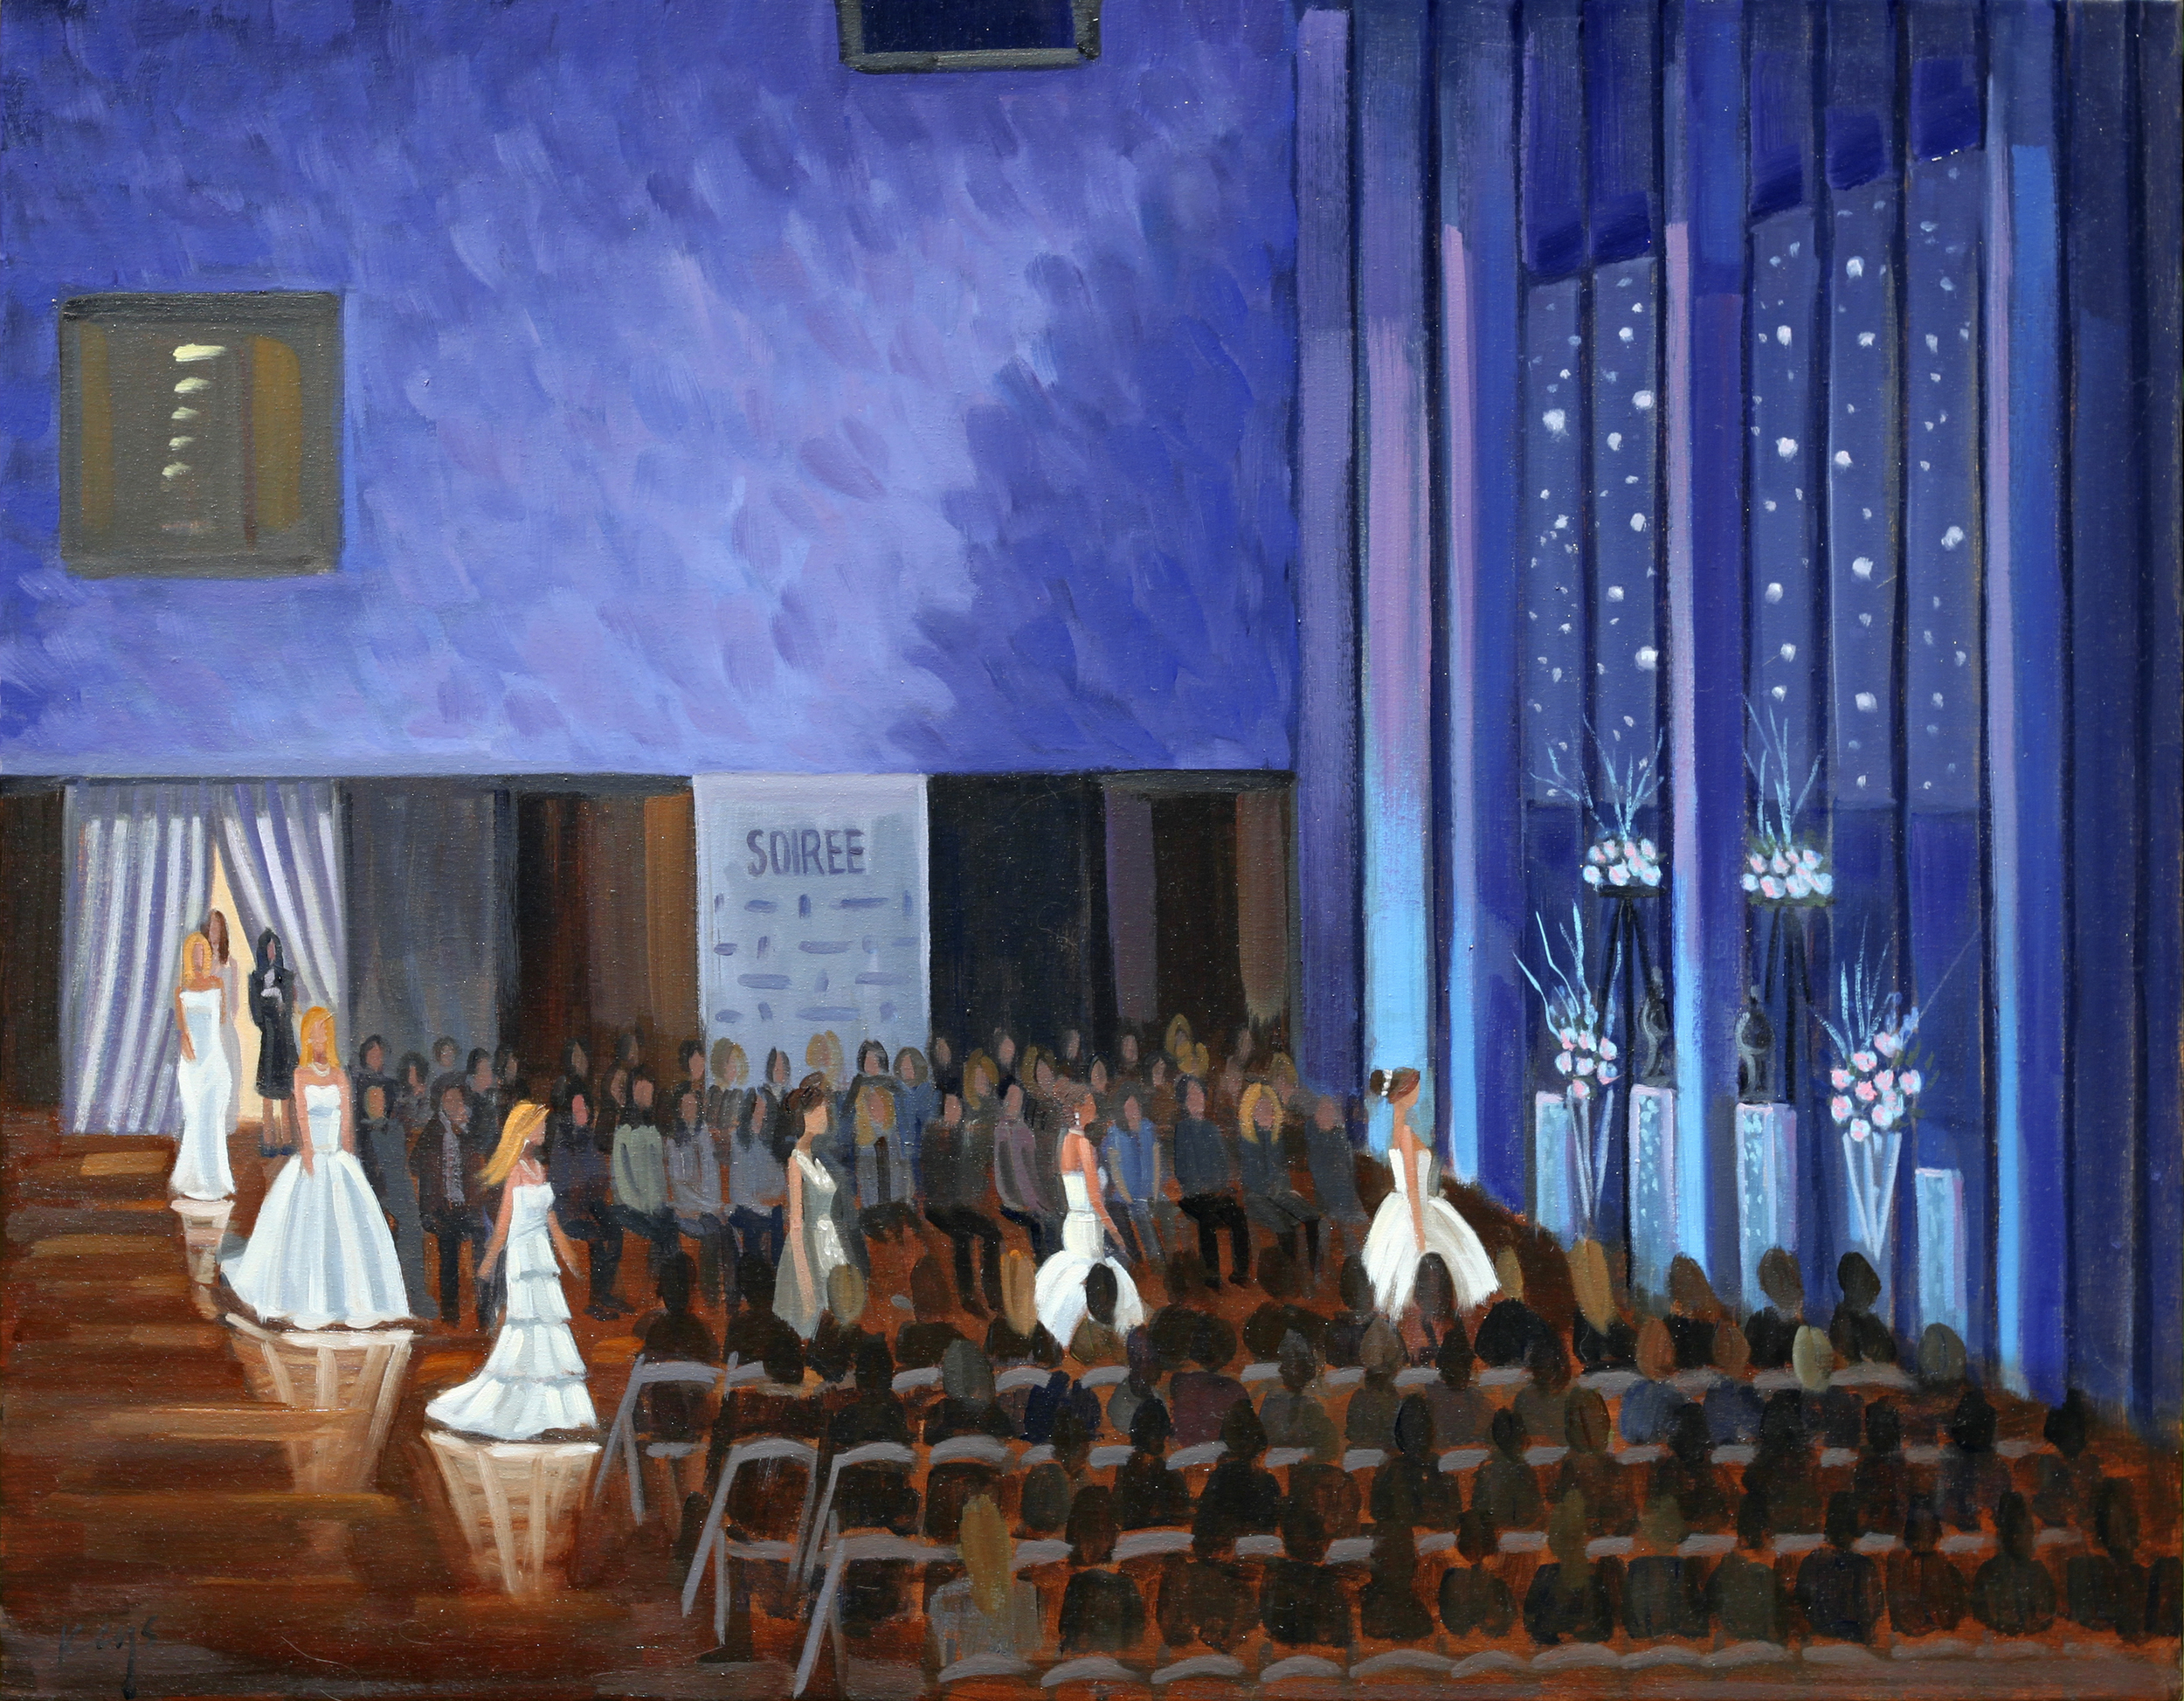 Soiree Fashion Show | 24 x 30 in. Oil on Canvas | The Mint Museum, Charlotte, NC